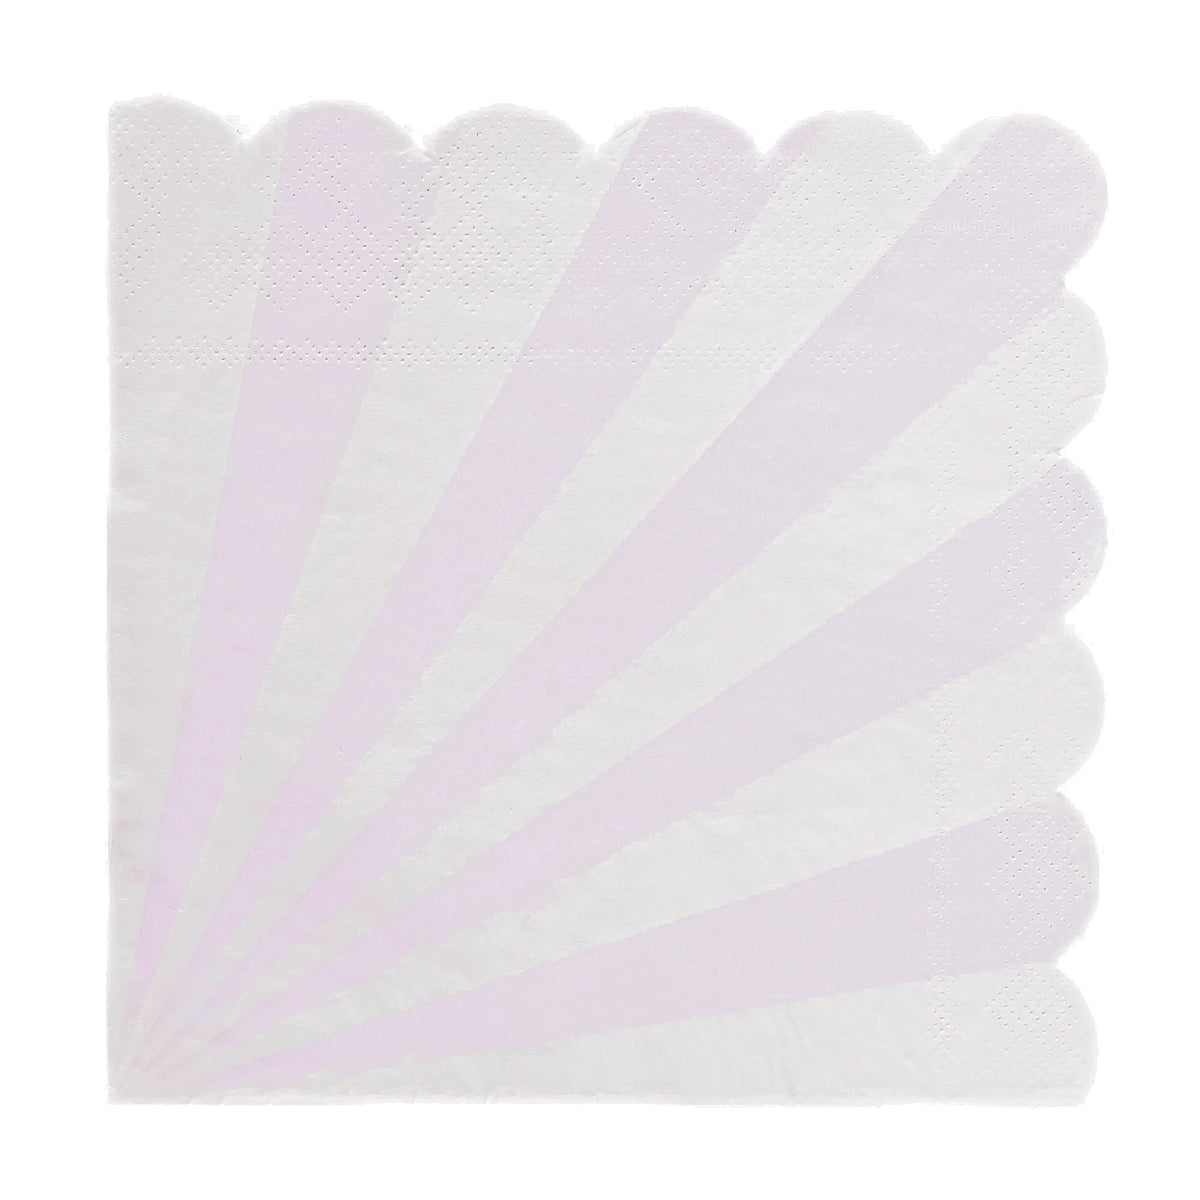 YIWU SANDY PAPER PRODUCTS CO., LTD Everyday Entertaining Candy Land Large Lunch Napkins, Lavender, 16 Count 810120712857